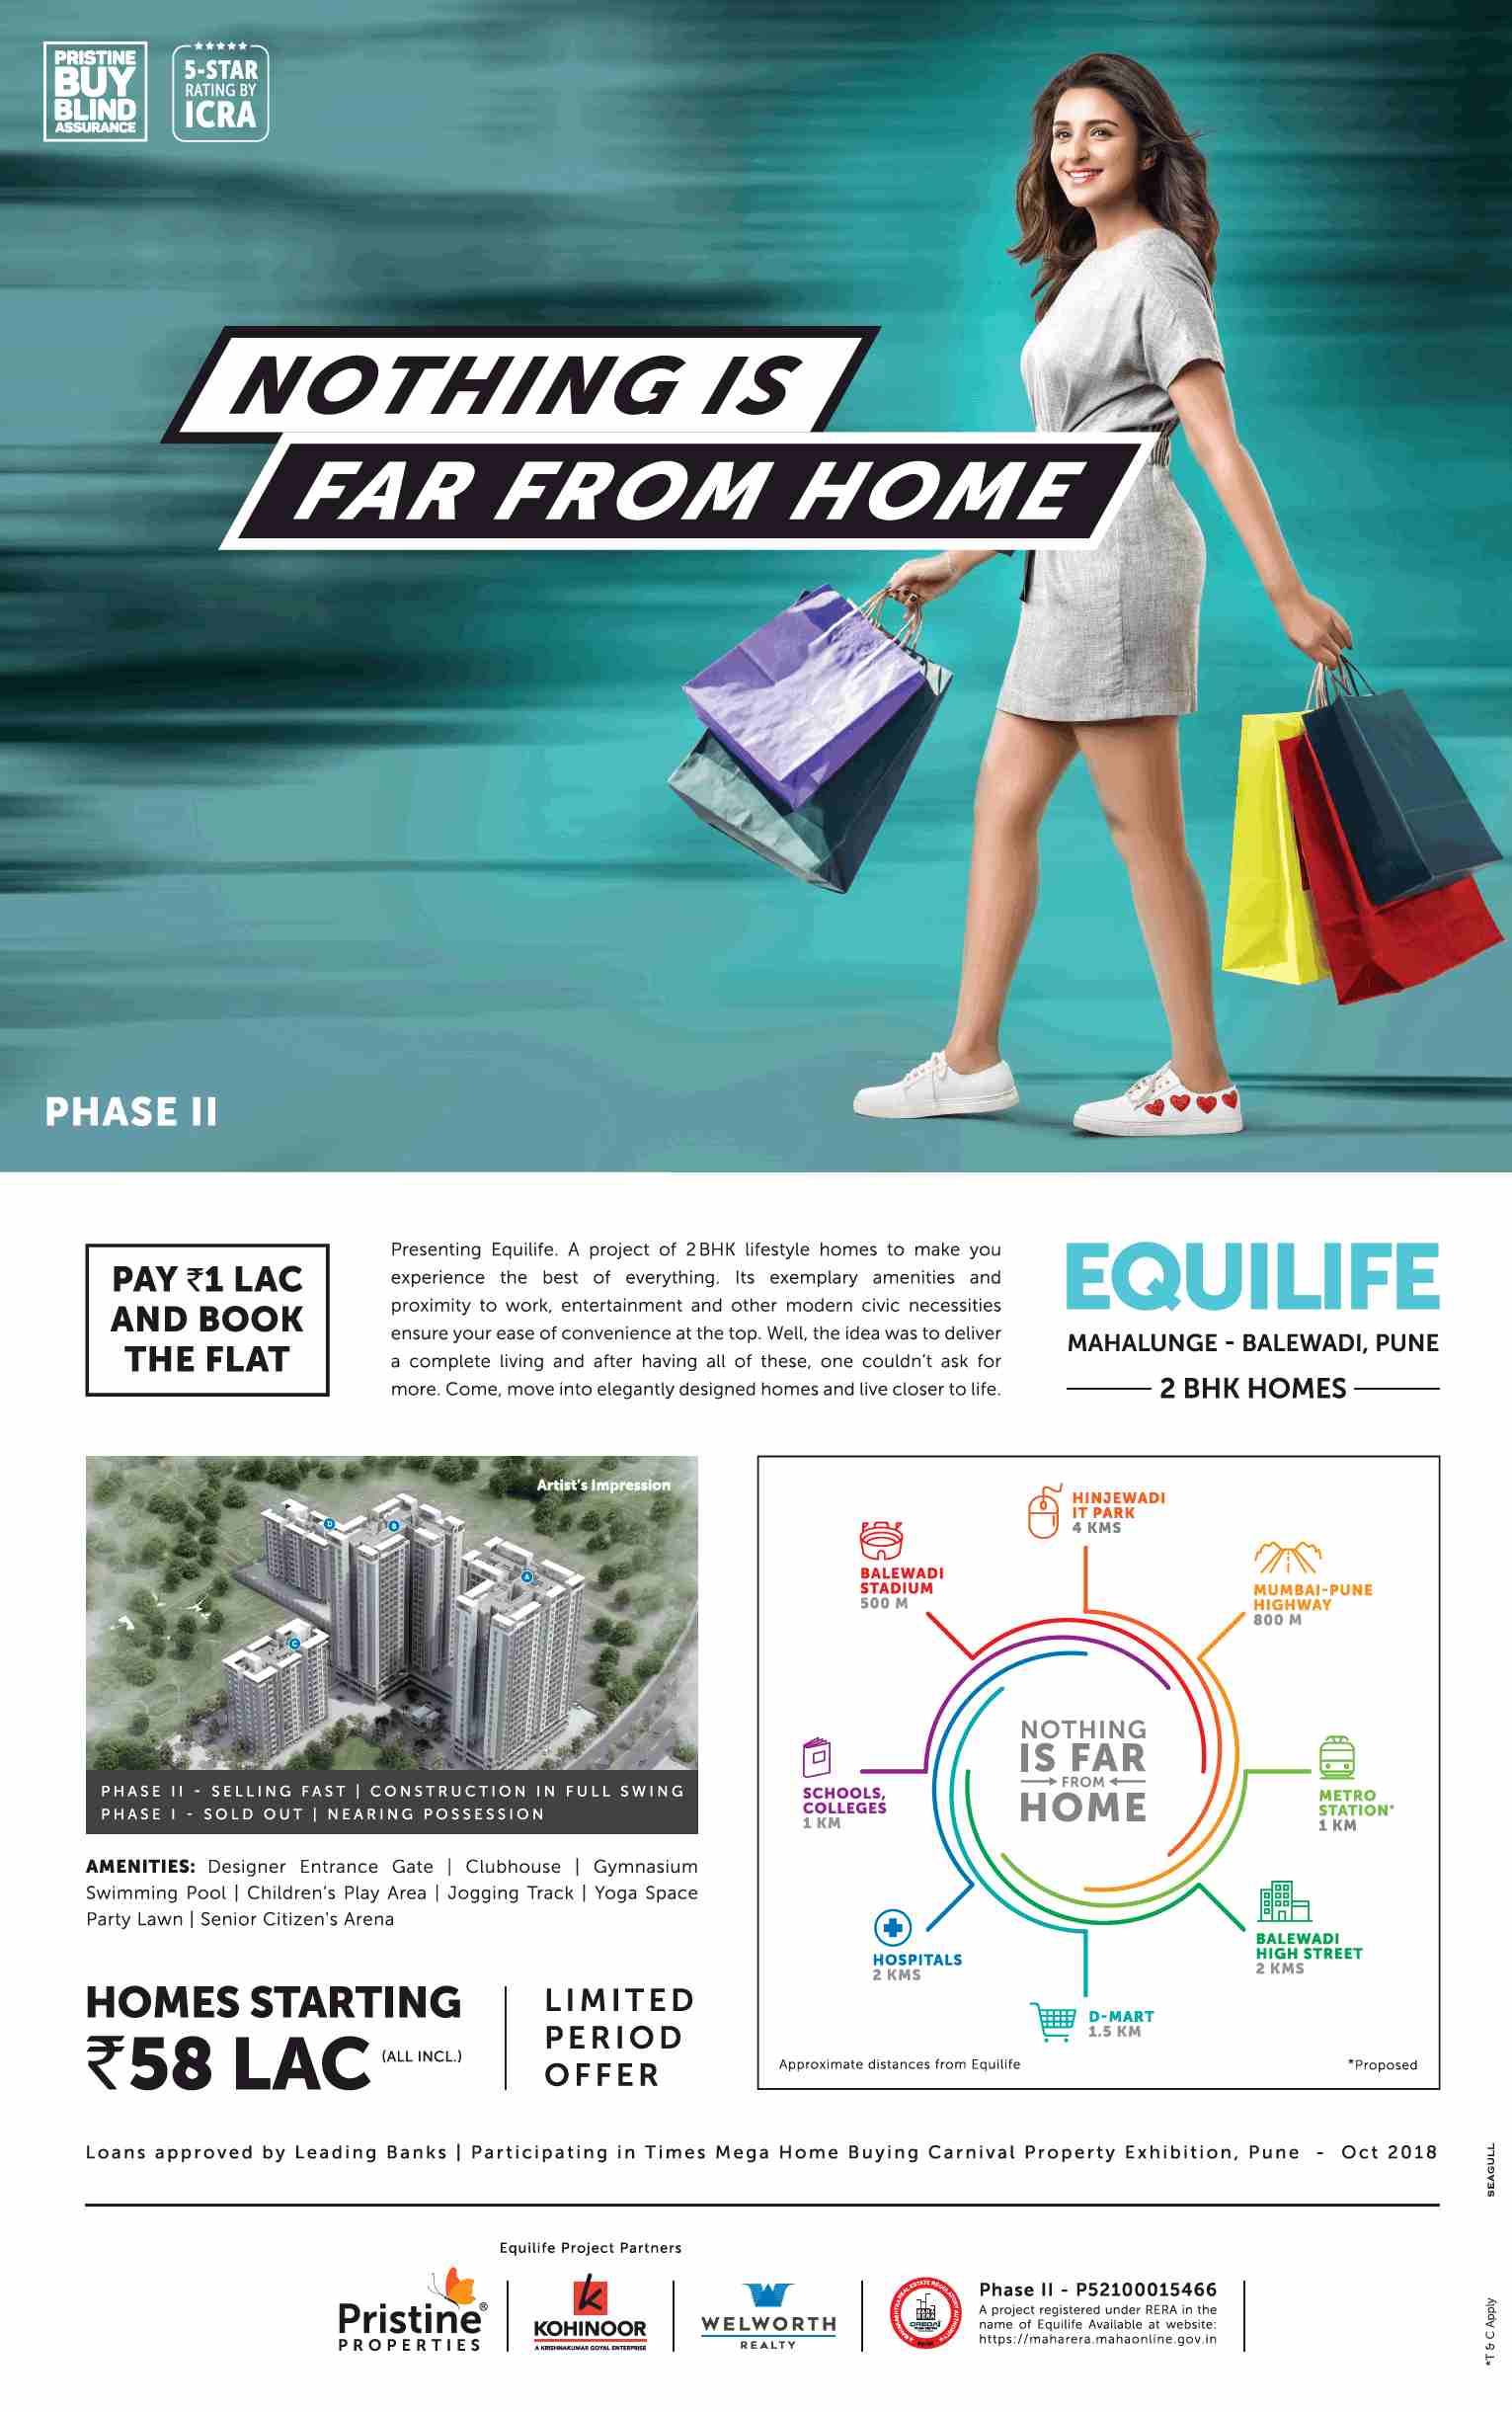 Pay 1% and book your home at Pristine Equilife Homes in Pune Update